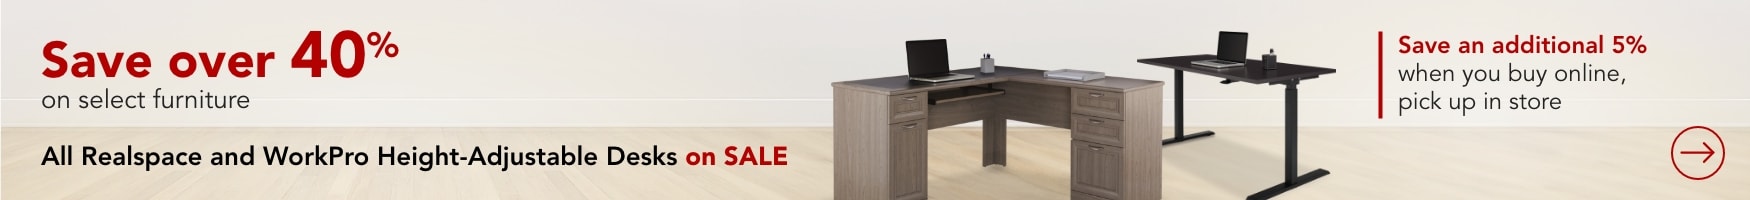 Save over 40% on select furniture